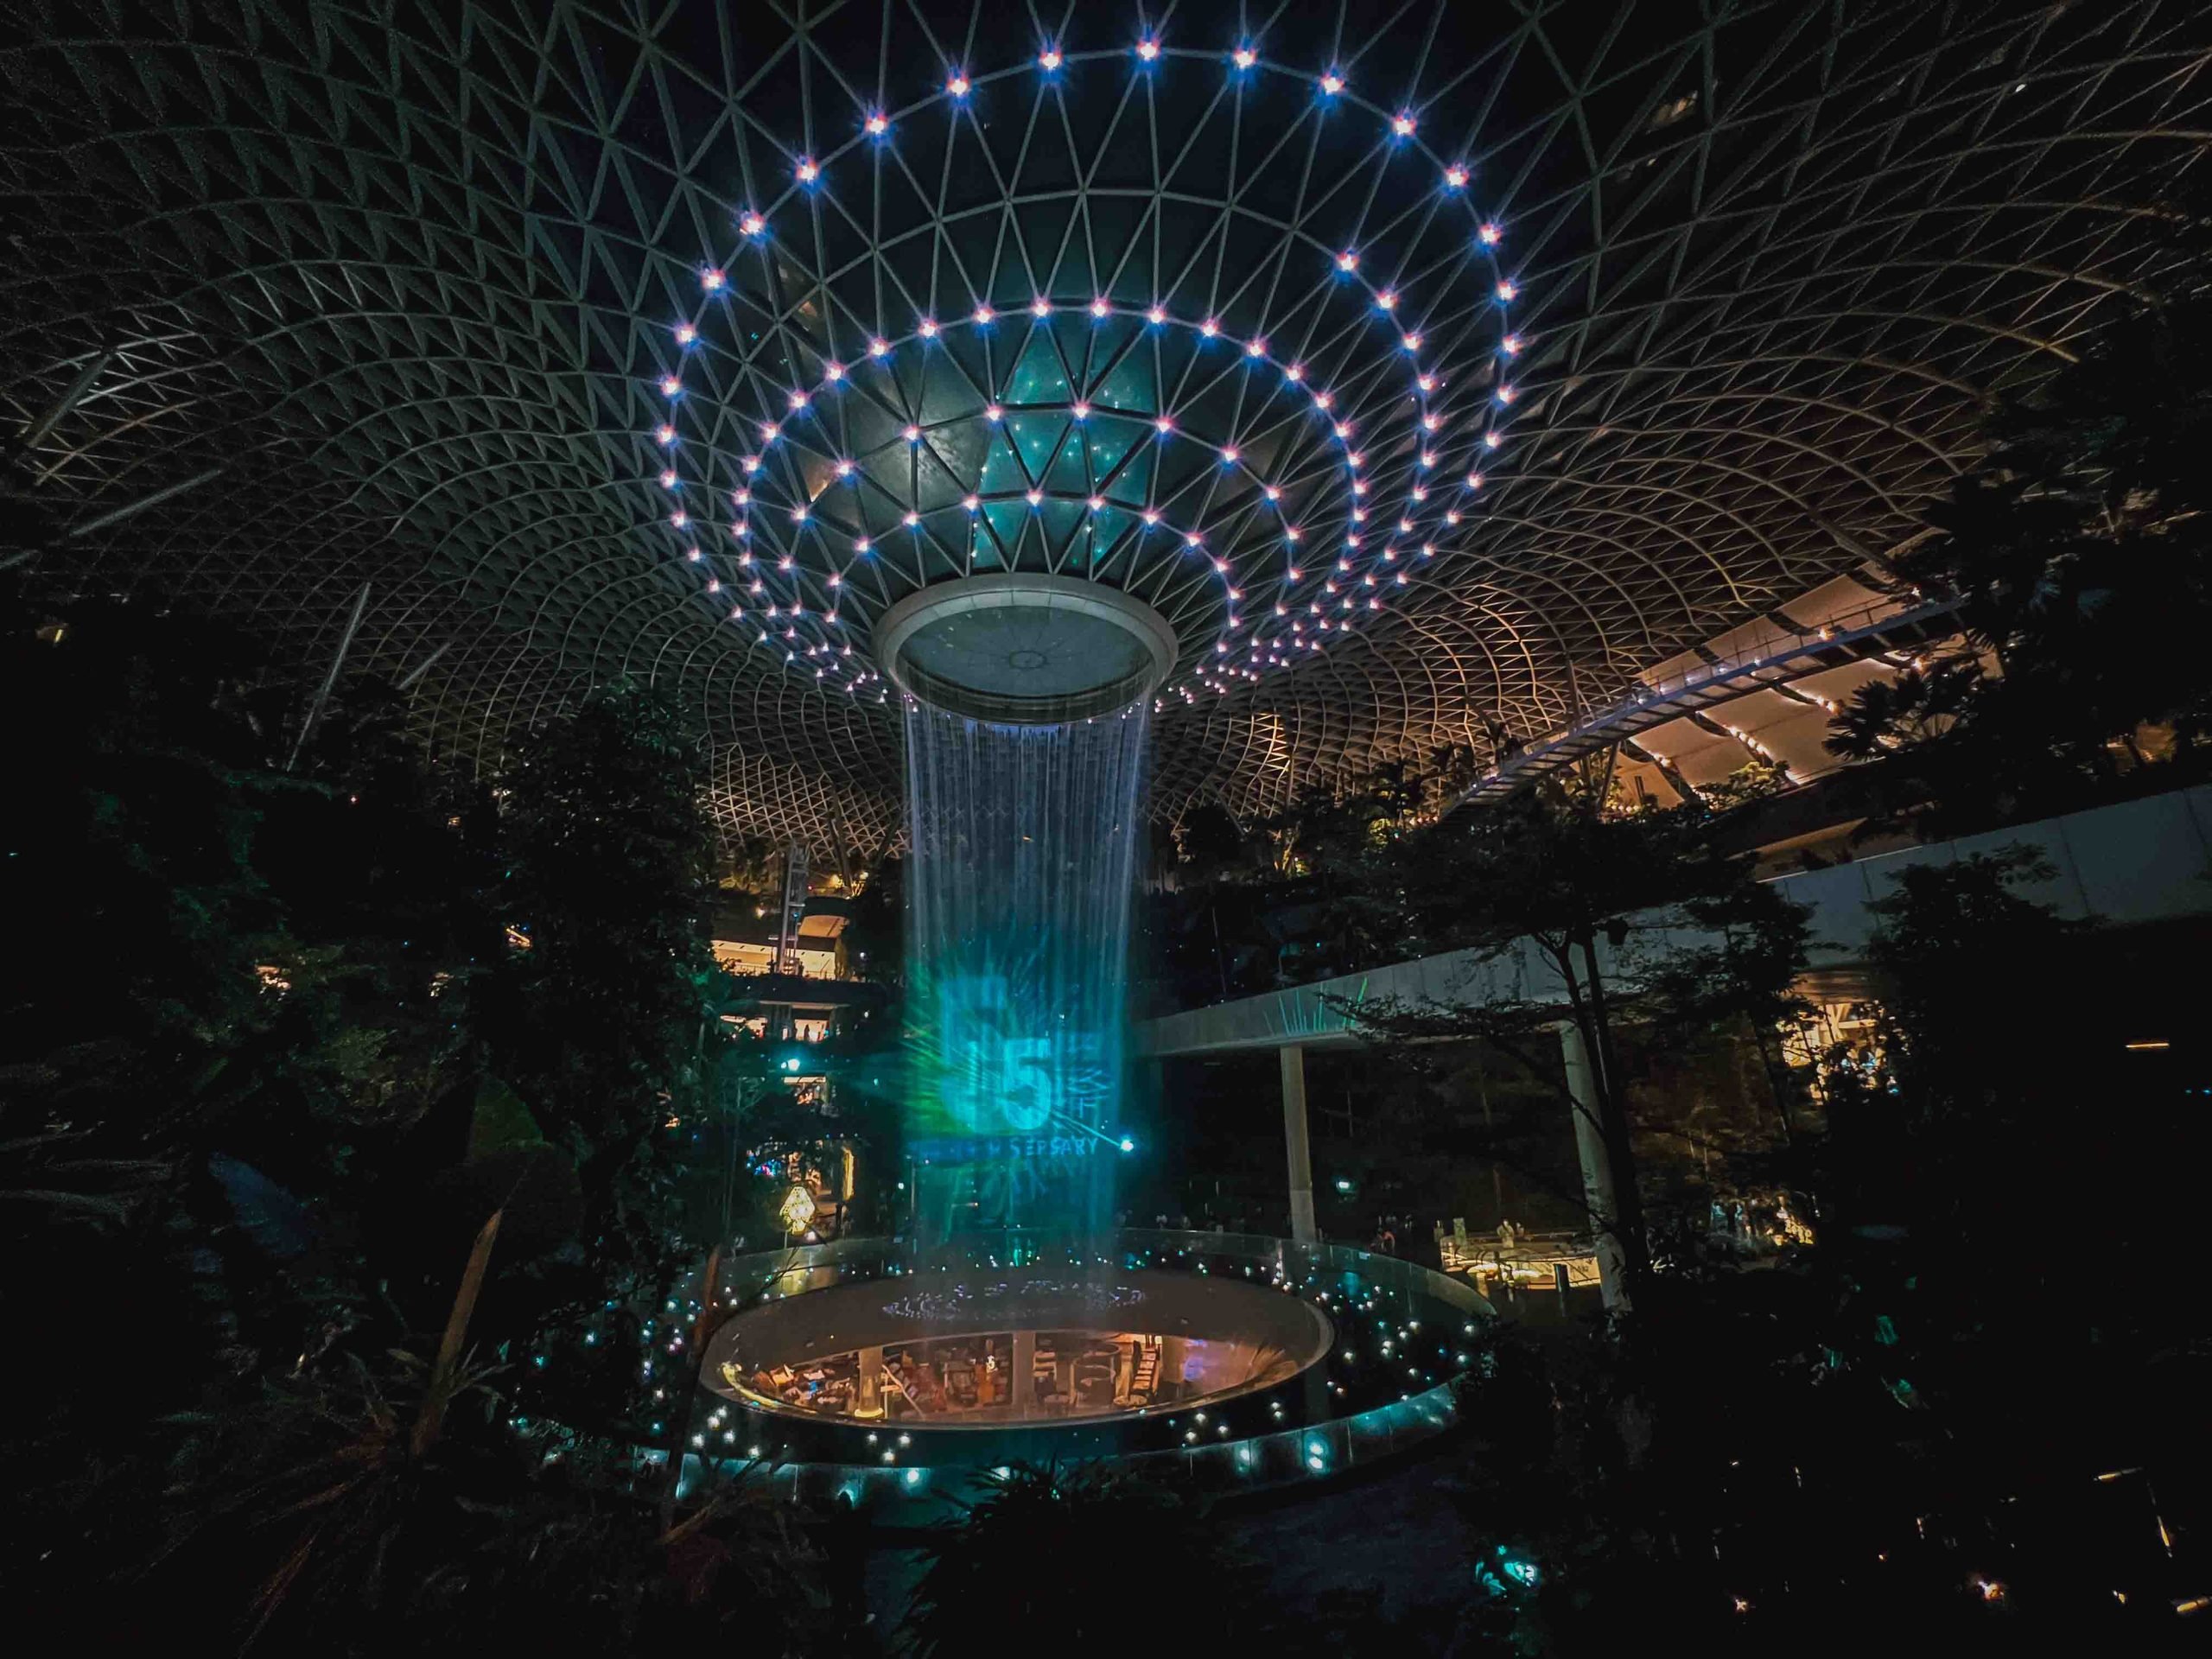 Jewel Changi Airport is celebrating its 5th anniversary with a new Light & Music show, behind-the-scenes Rain Vortex tours, interactive floral showcases and more